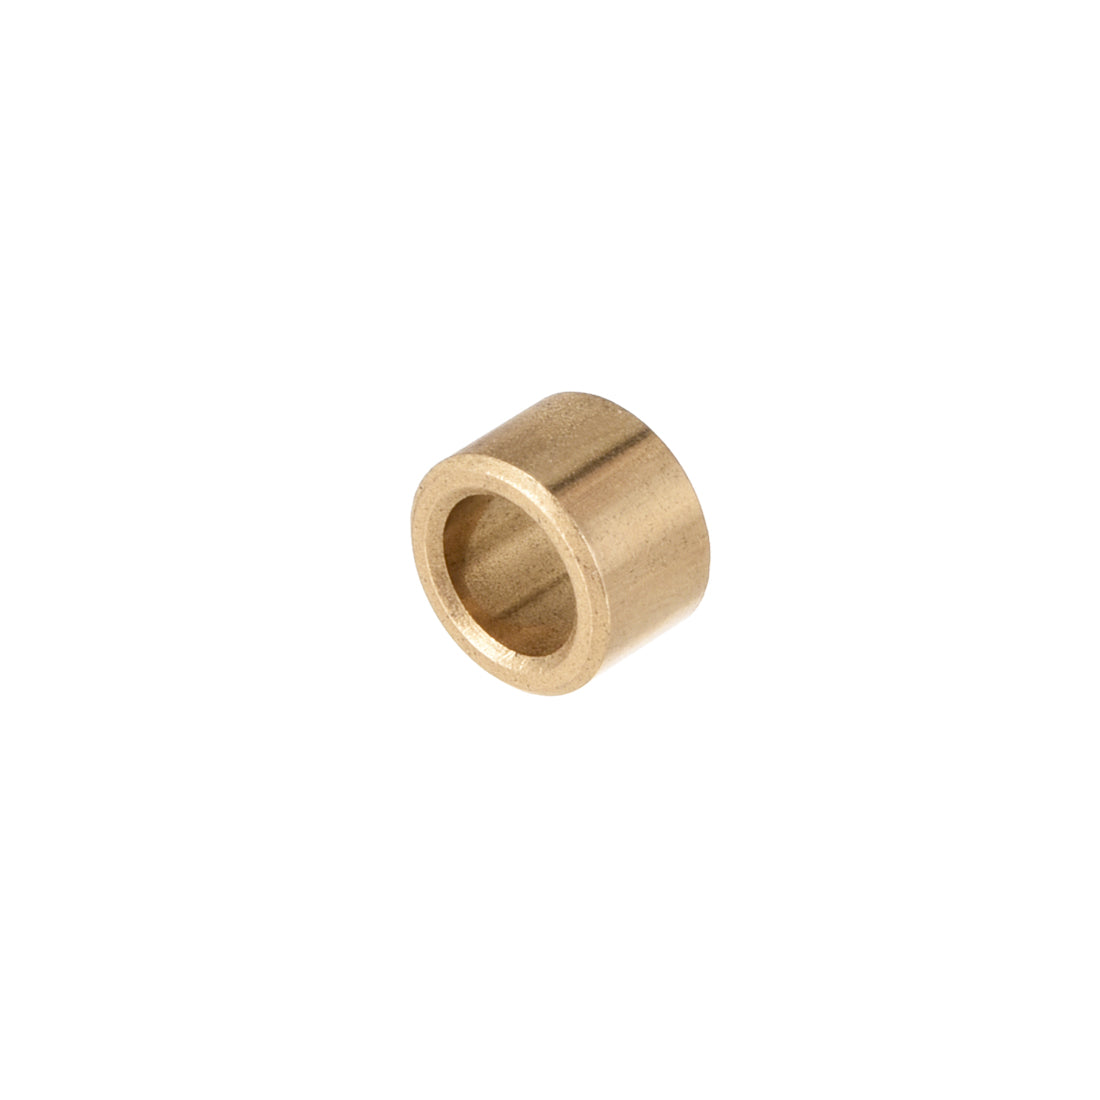 uxcell Uxcell Bearing Sleeve Length Self-Lubricating Sintered Bronze Bushings